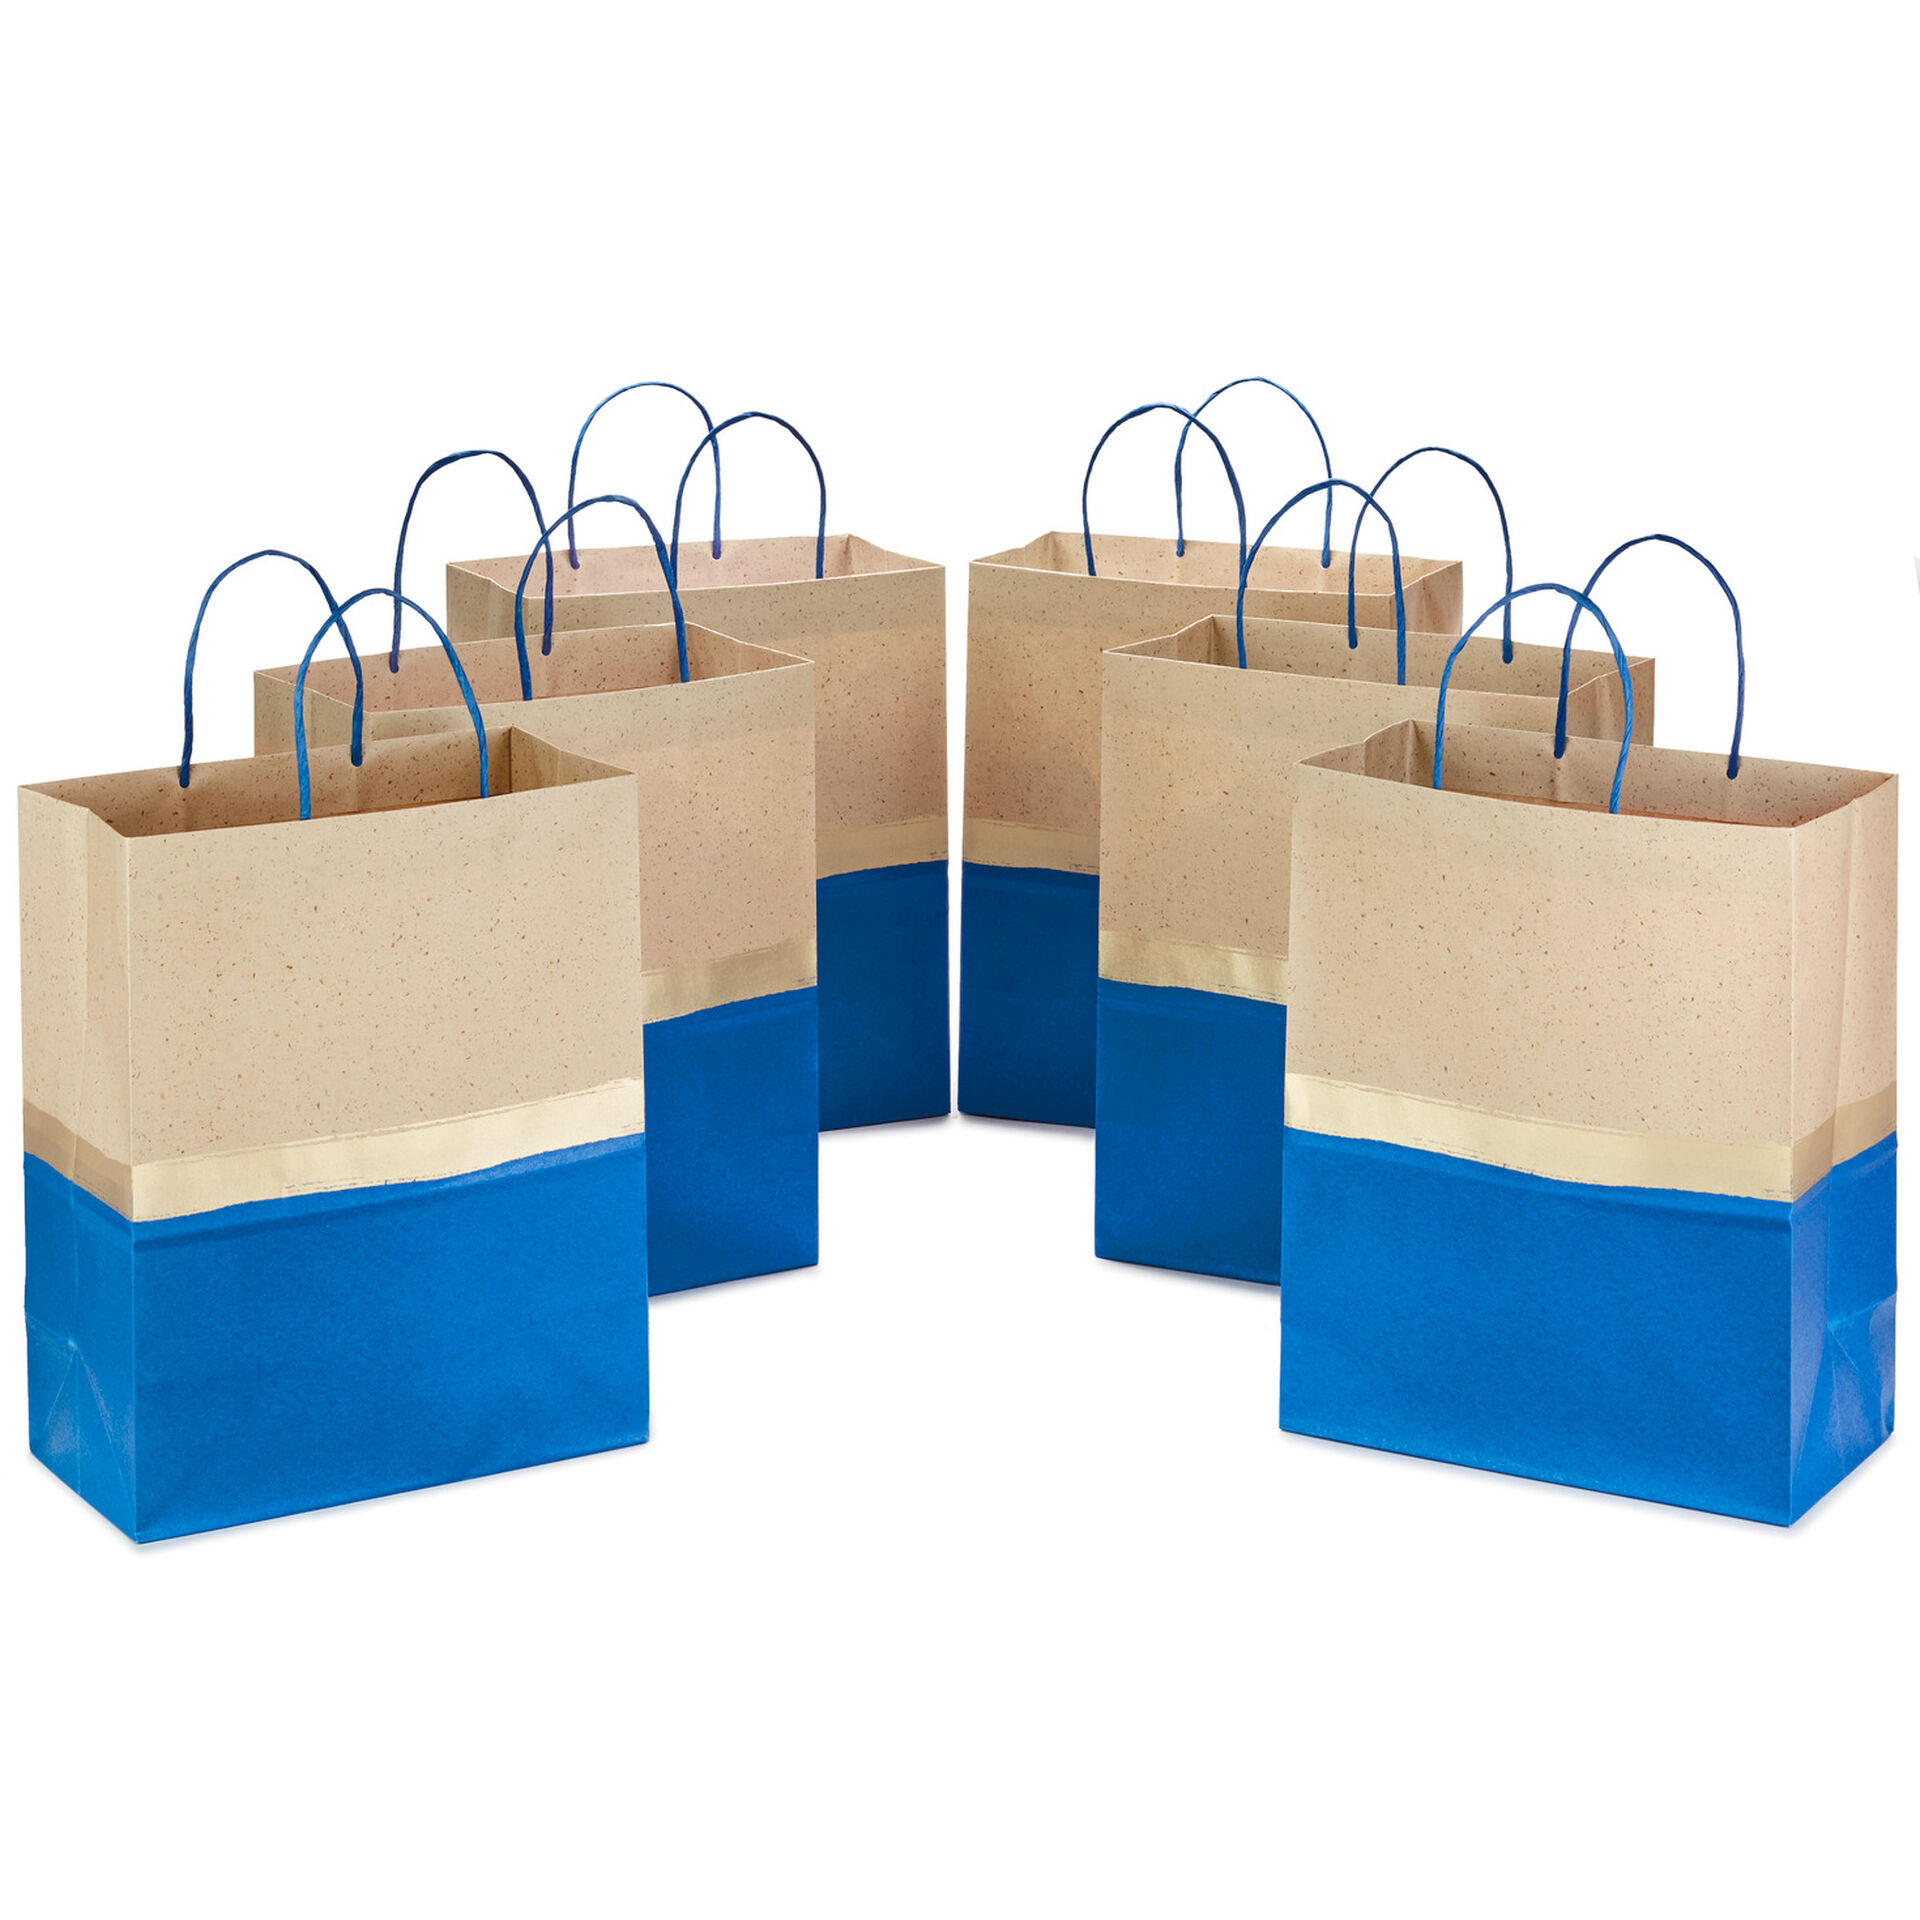 PTP Multiple Sizes Prime Time Packaging Ltd White or Natural Colors Weddings Holidays and All Occasions 250 Count| Perfect for Birthdays 5.75 x 3.25 x 8.3 Natural Kraft Paper Gift Tote Bags 